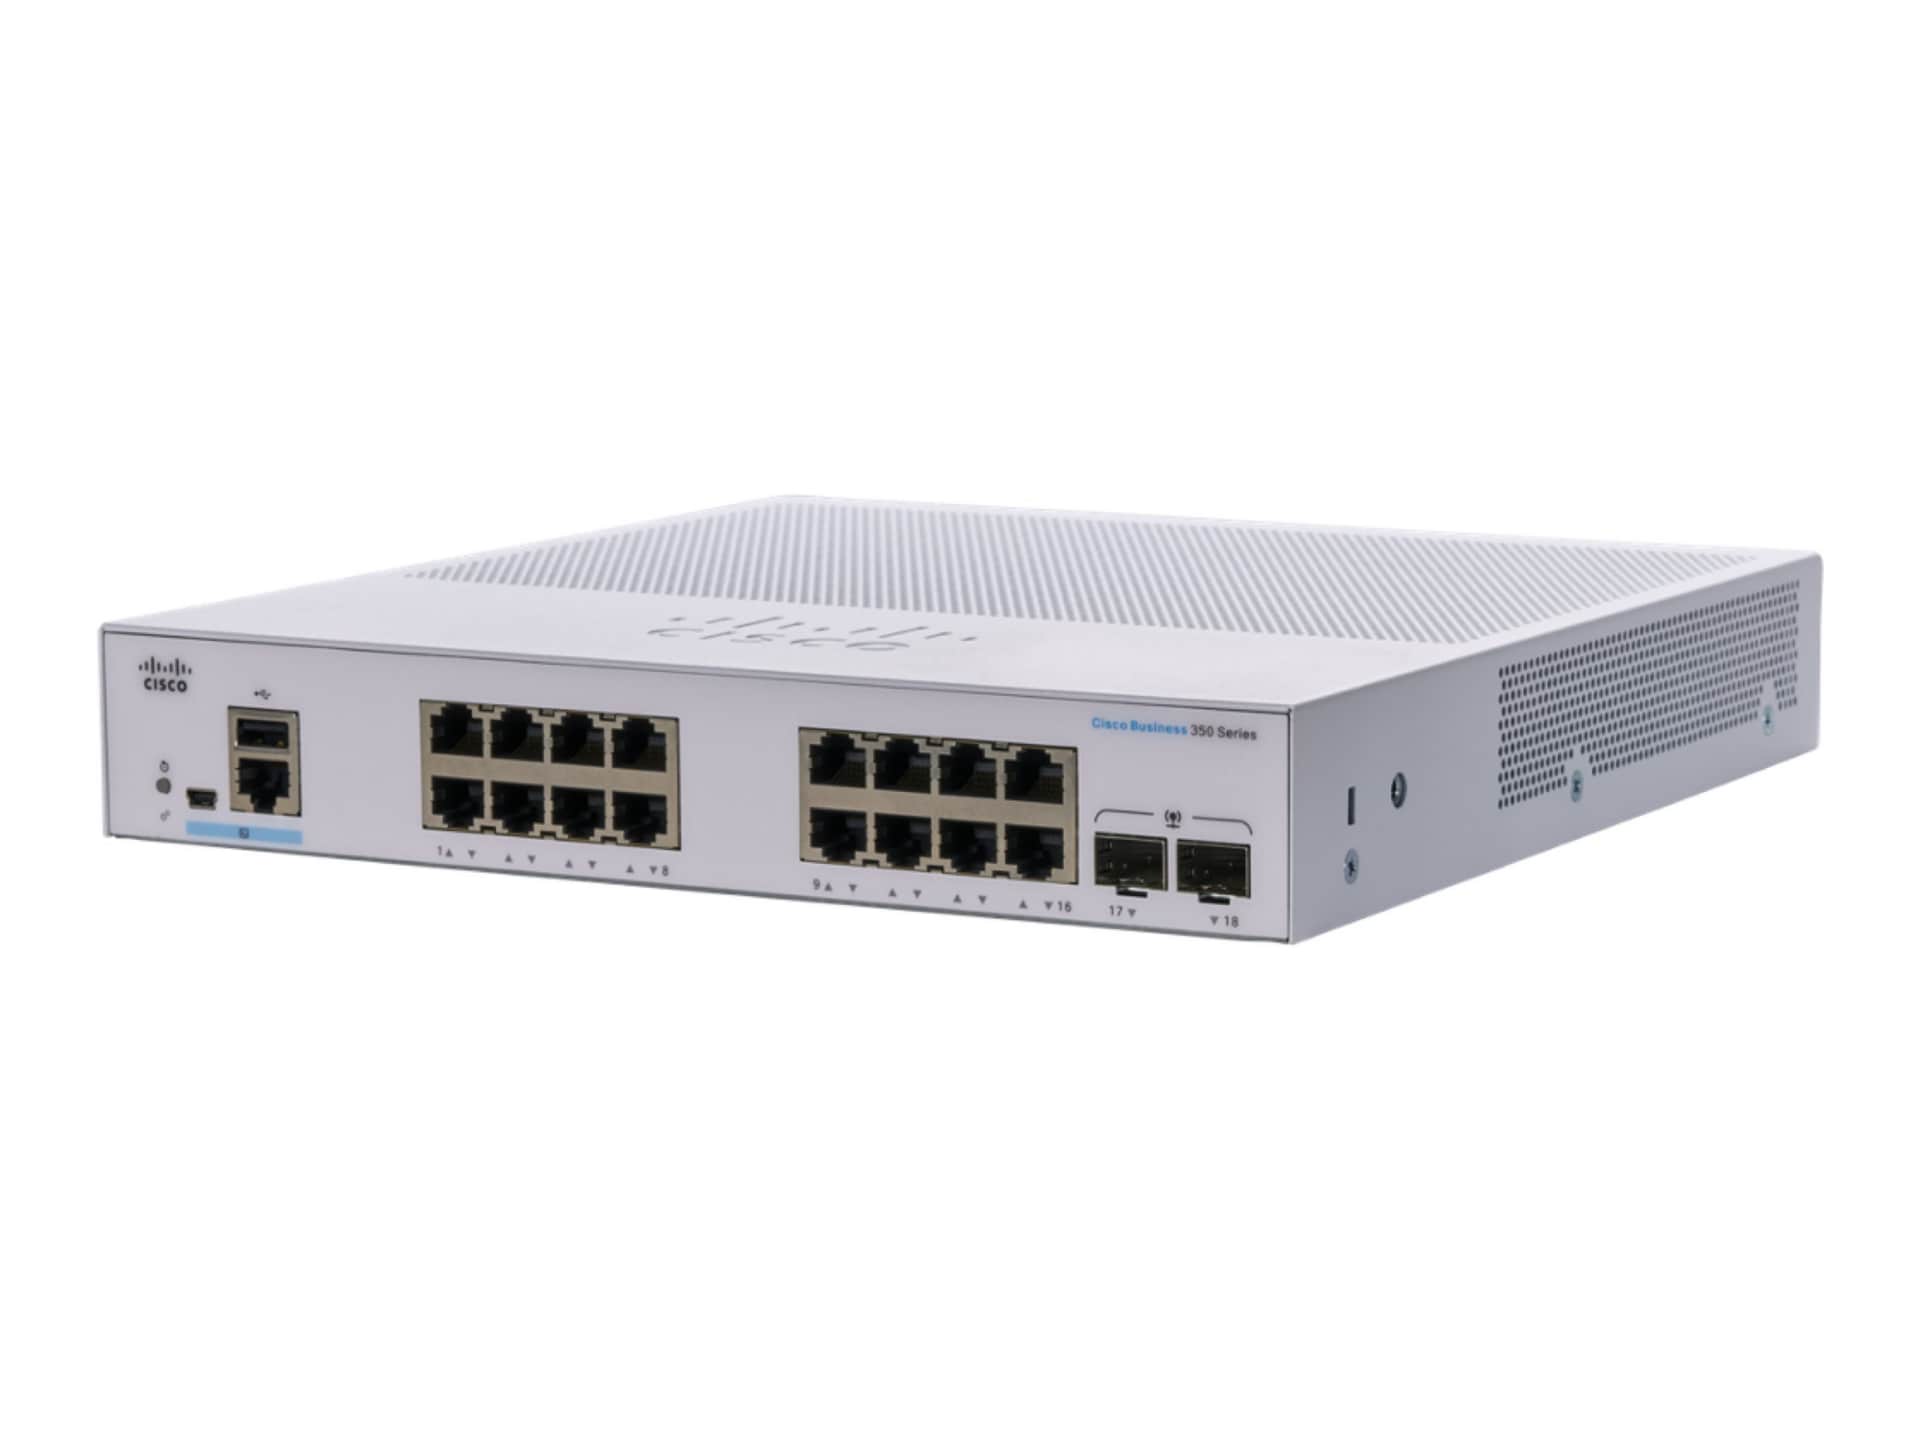 Cisco Business 350 Series CBS350-16T-E-2G - switch - 18 ports - managed - rack-mountable